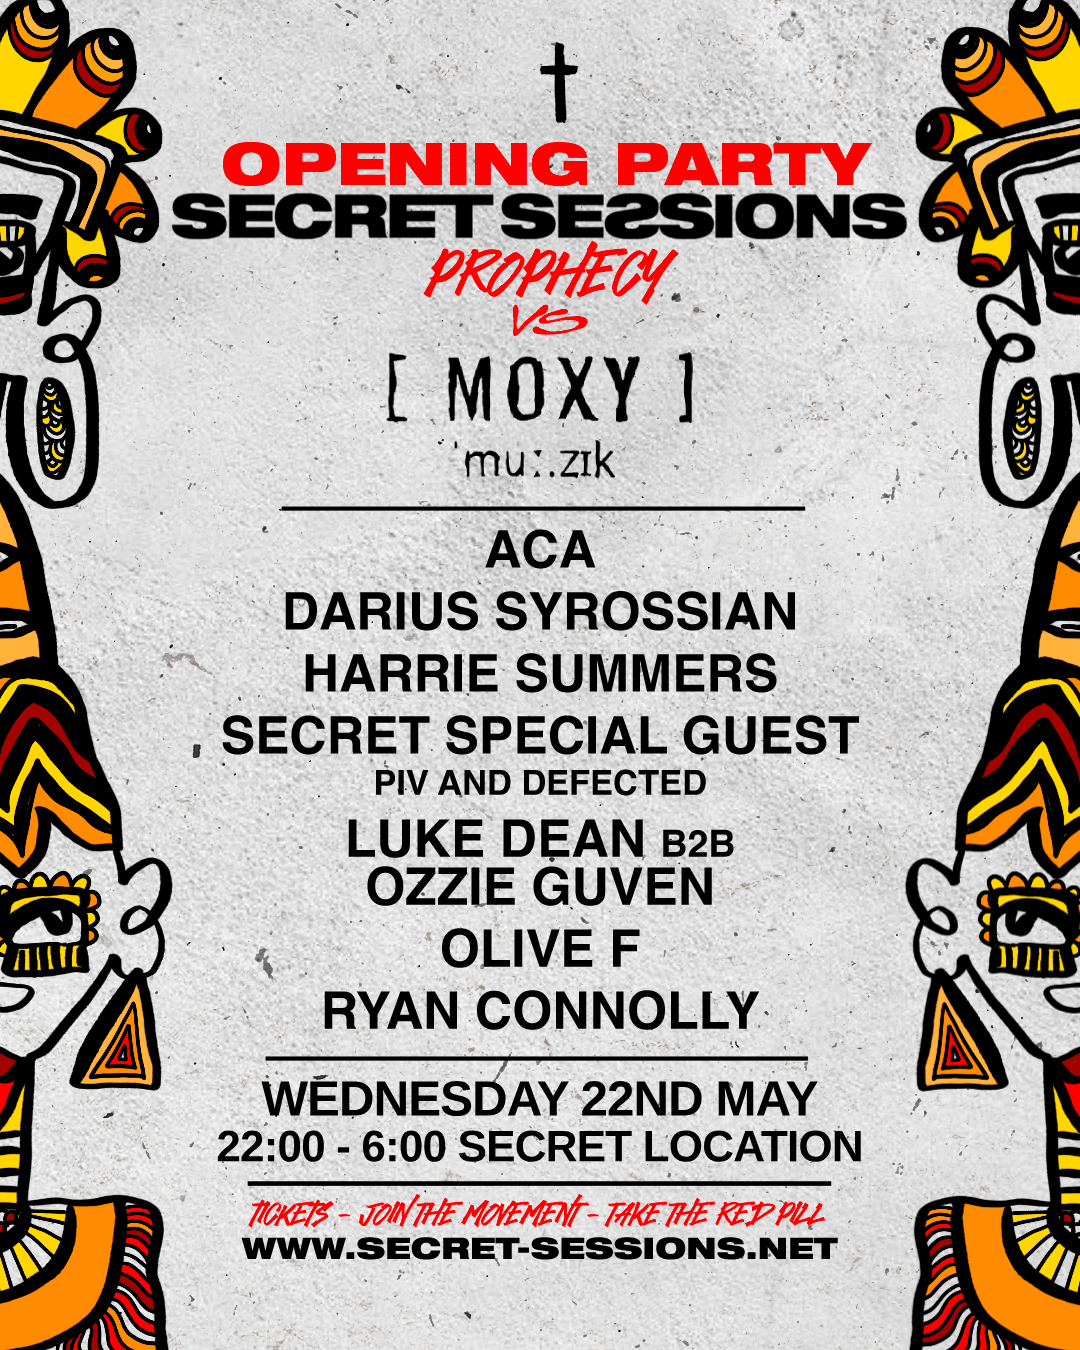 Secret Sessions x Moxy - Prophecy - Opening Party IBIZA - フライヤー表